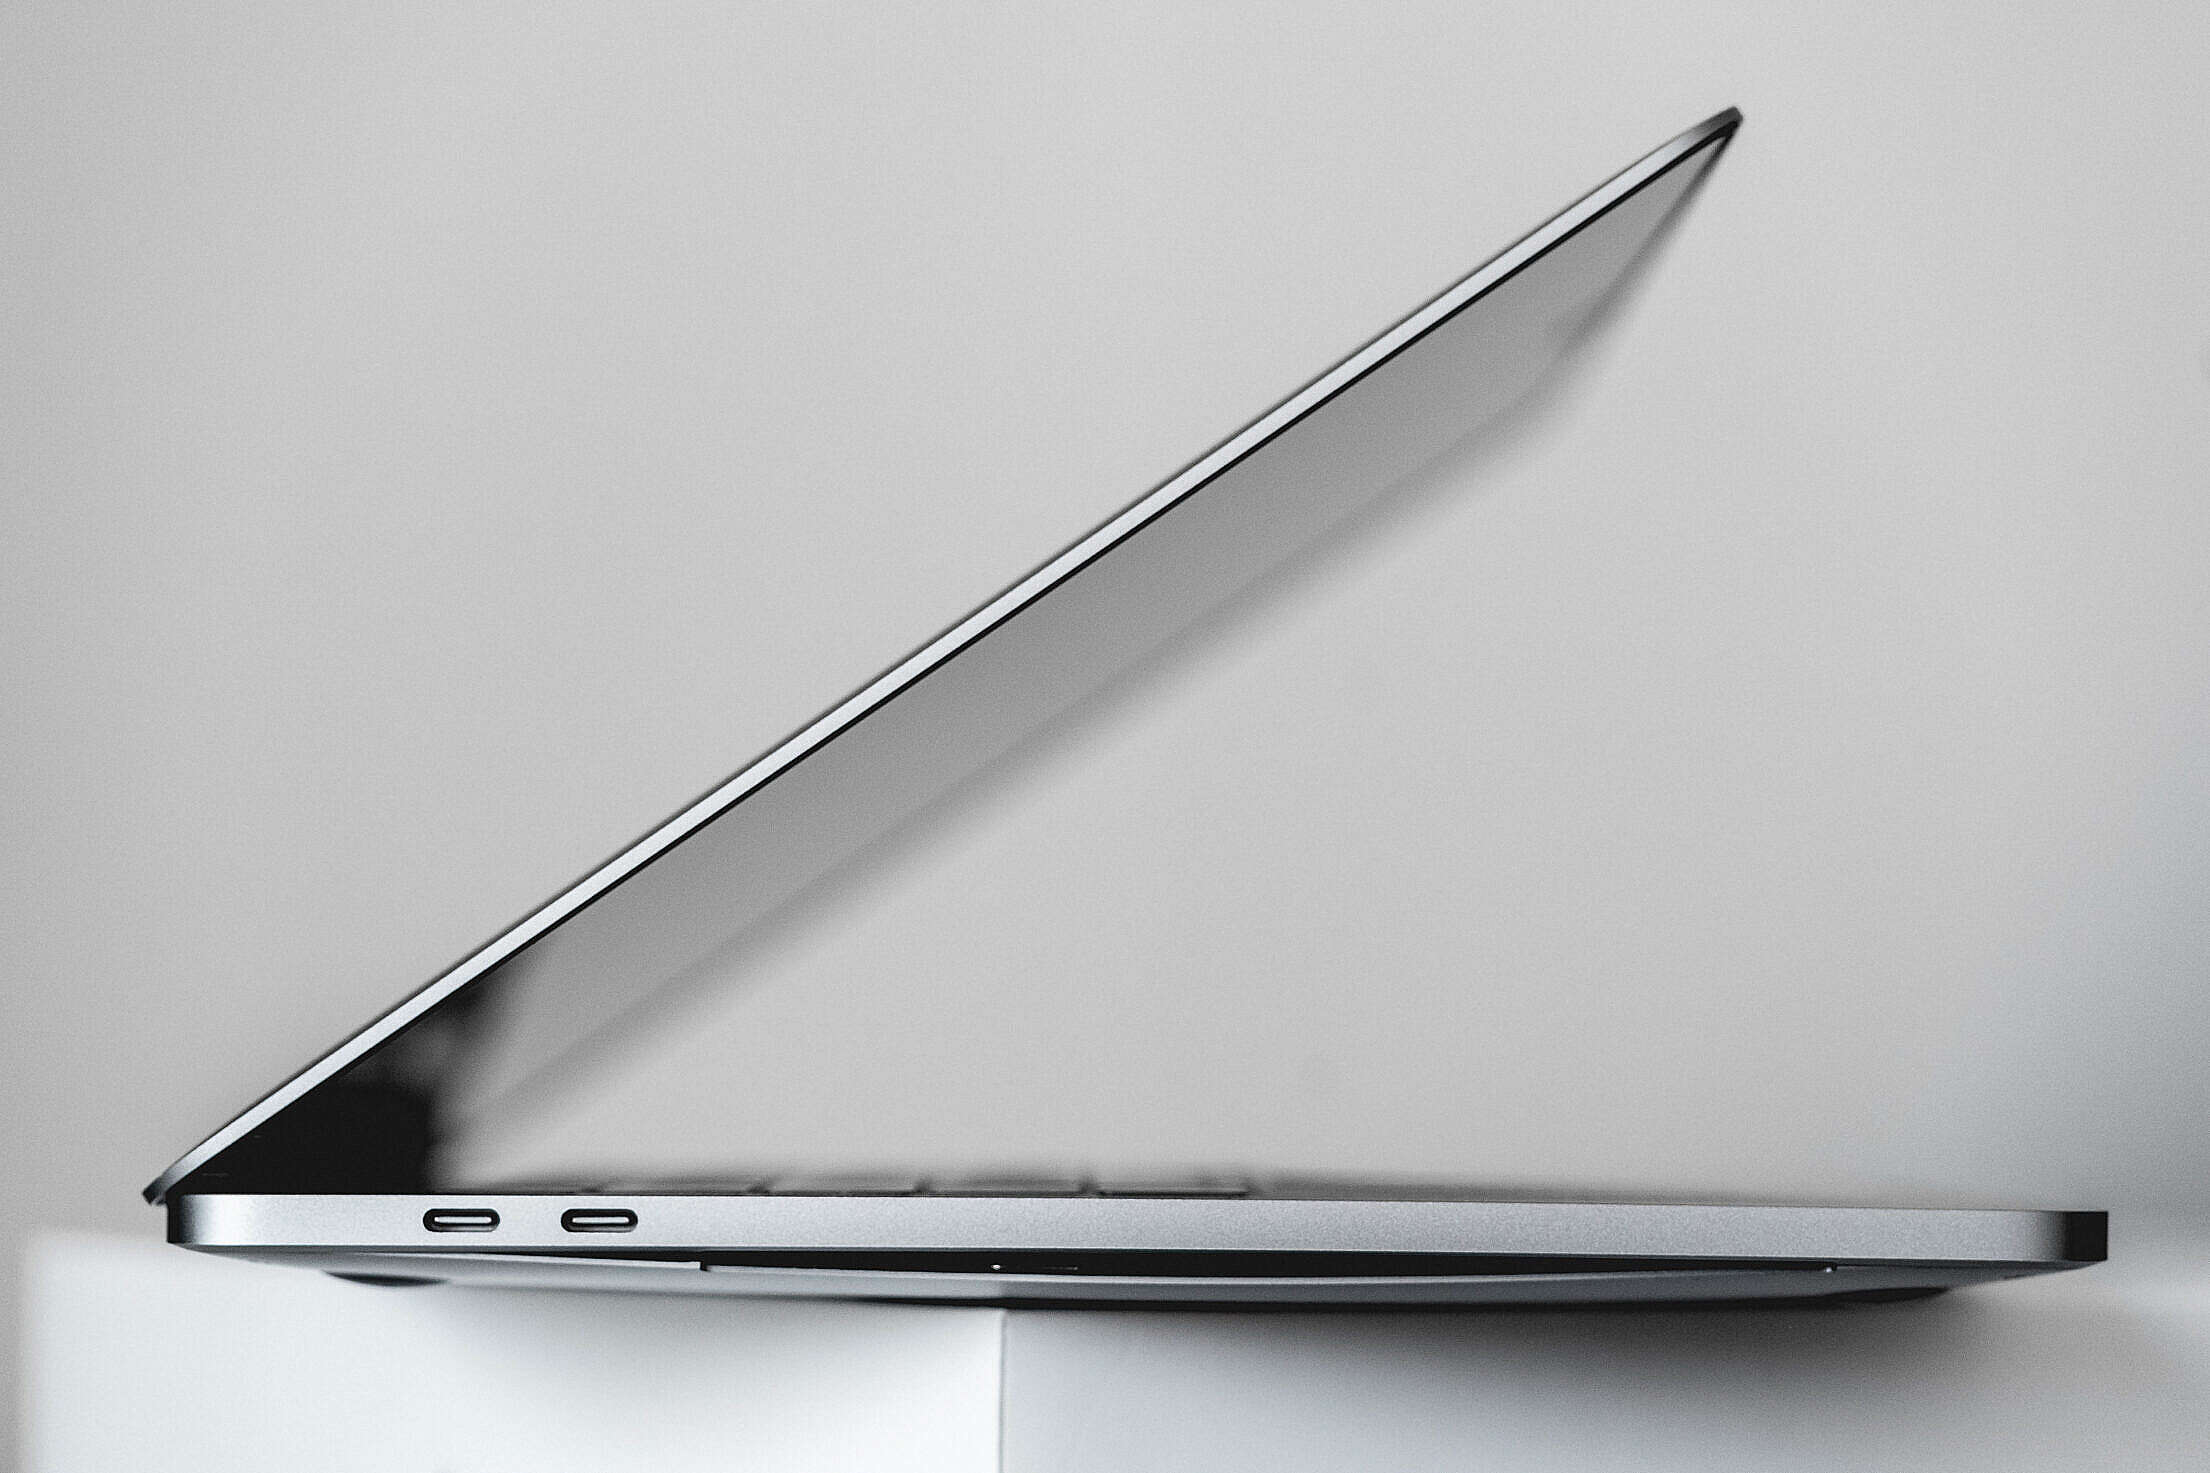 MacBook Pro with Swollen Expanding Battery Free Stock Photo